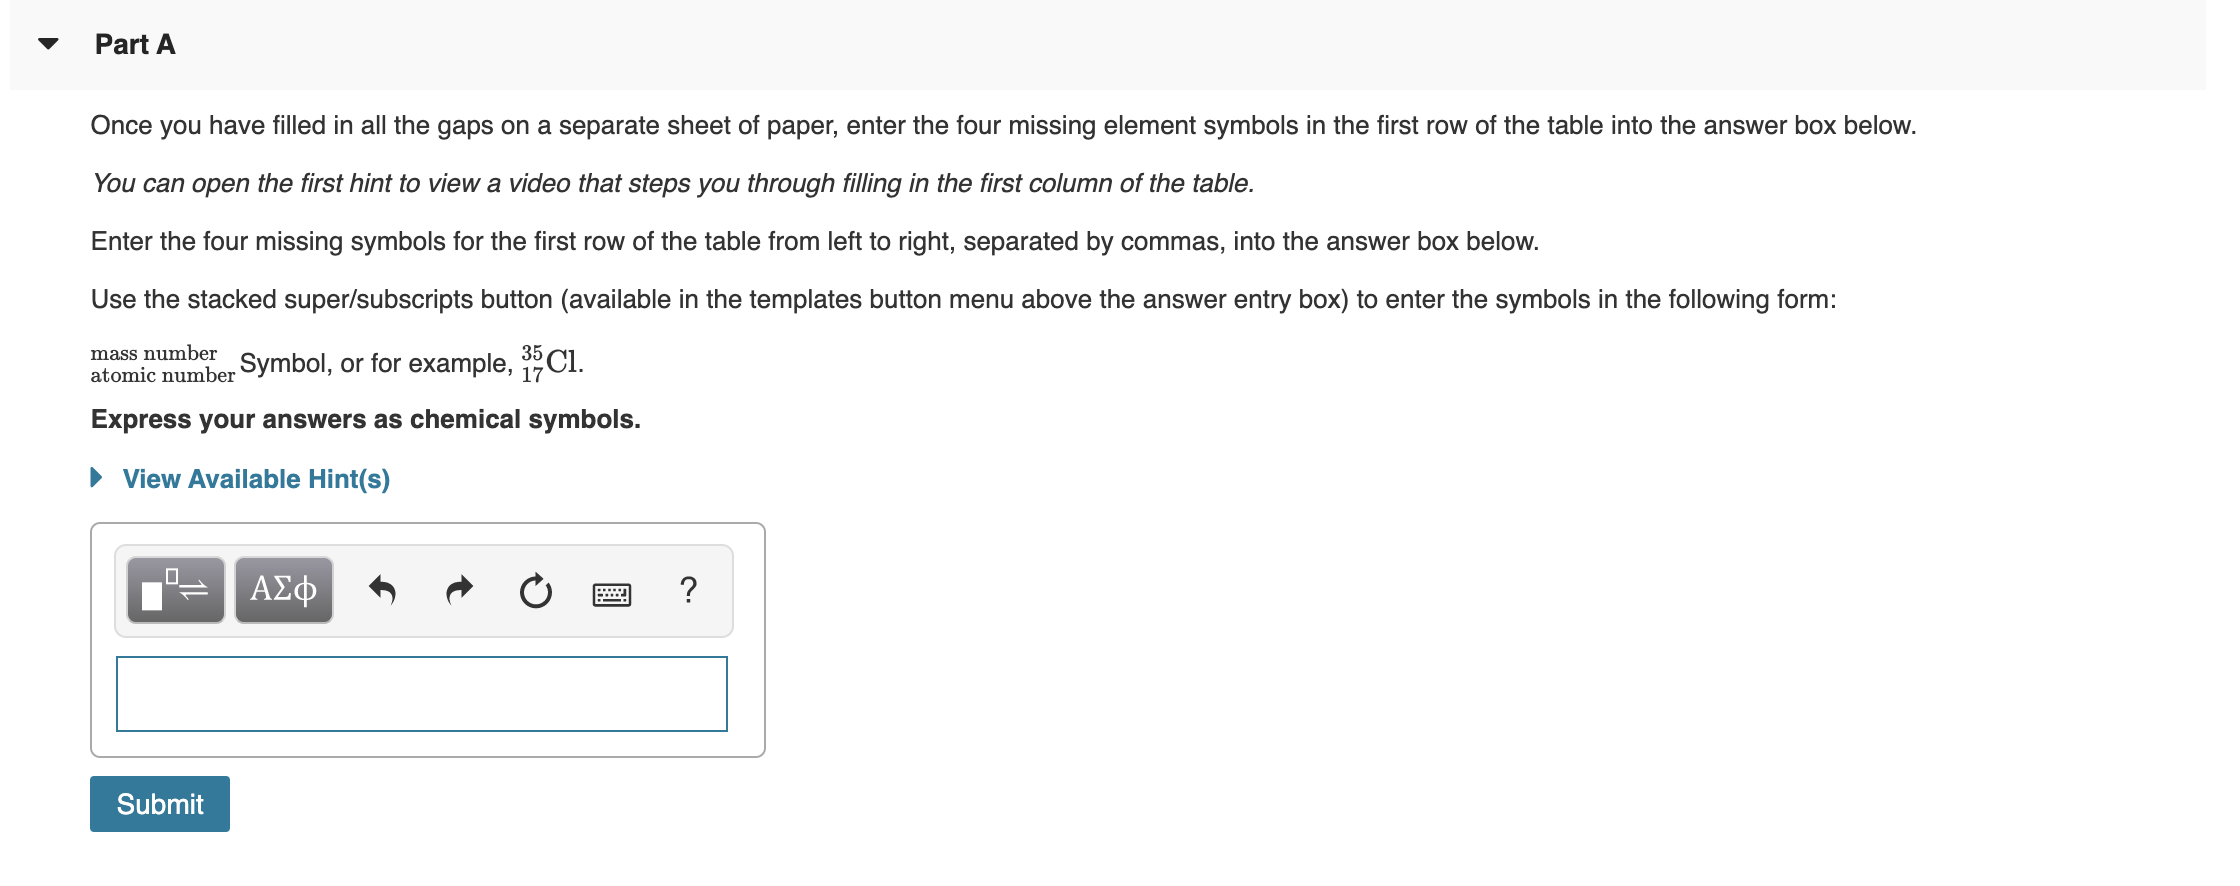 Part A
Once you have filled in all the gaps on a separate sheet of paper, enter the four missing element symbols in the first row of the table into the answer box below.
You can open the first hint to view a video that steps you through filling in the first column of the table.
Enter the four missing symbols for the first row of the table from left to right, separated by commas, into the answer box below.
Use the stacked super/subscripts button (available in the templates button menu above the answer entry box) to enter the symbols in the following form:
mass number
atomic number Symbol, or for example, Cl.
Express your answers as chemical symbols.
35
17
View Available Hint(s)
ΑΣφ
Submit
